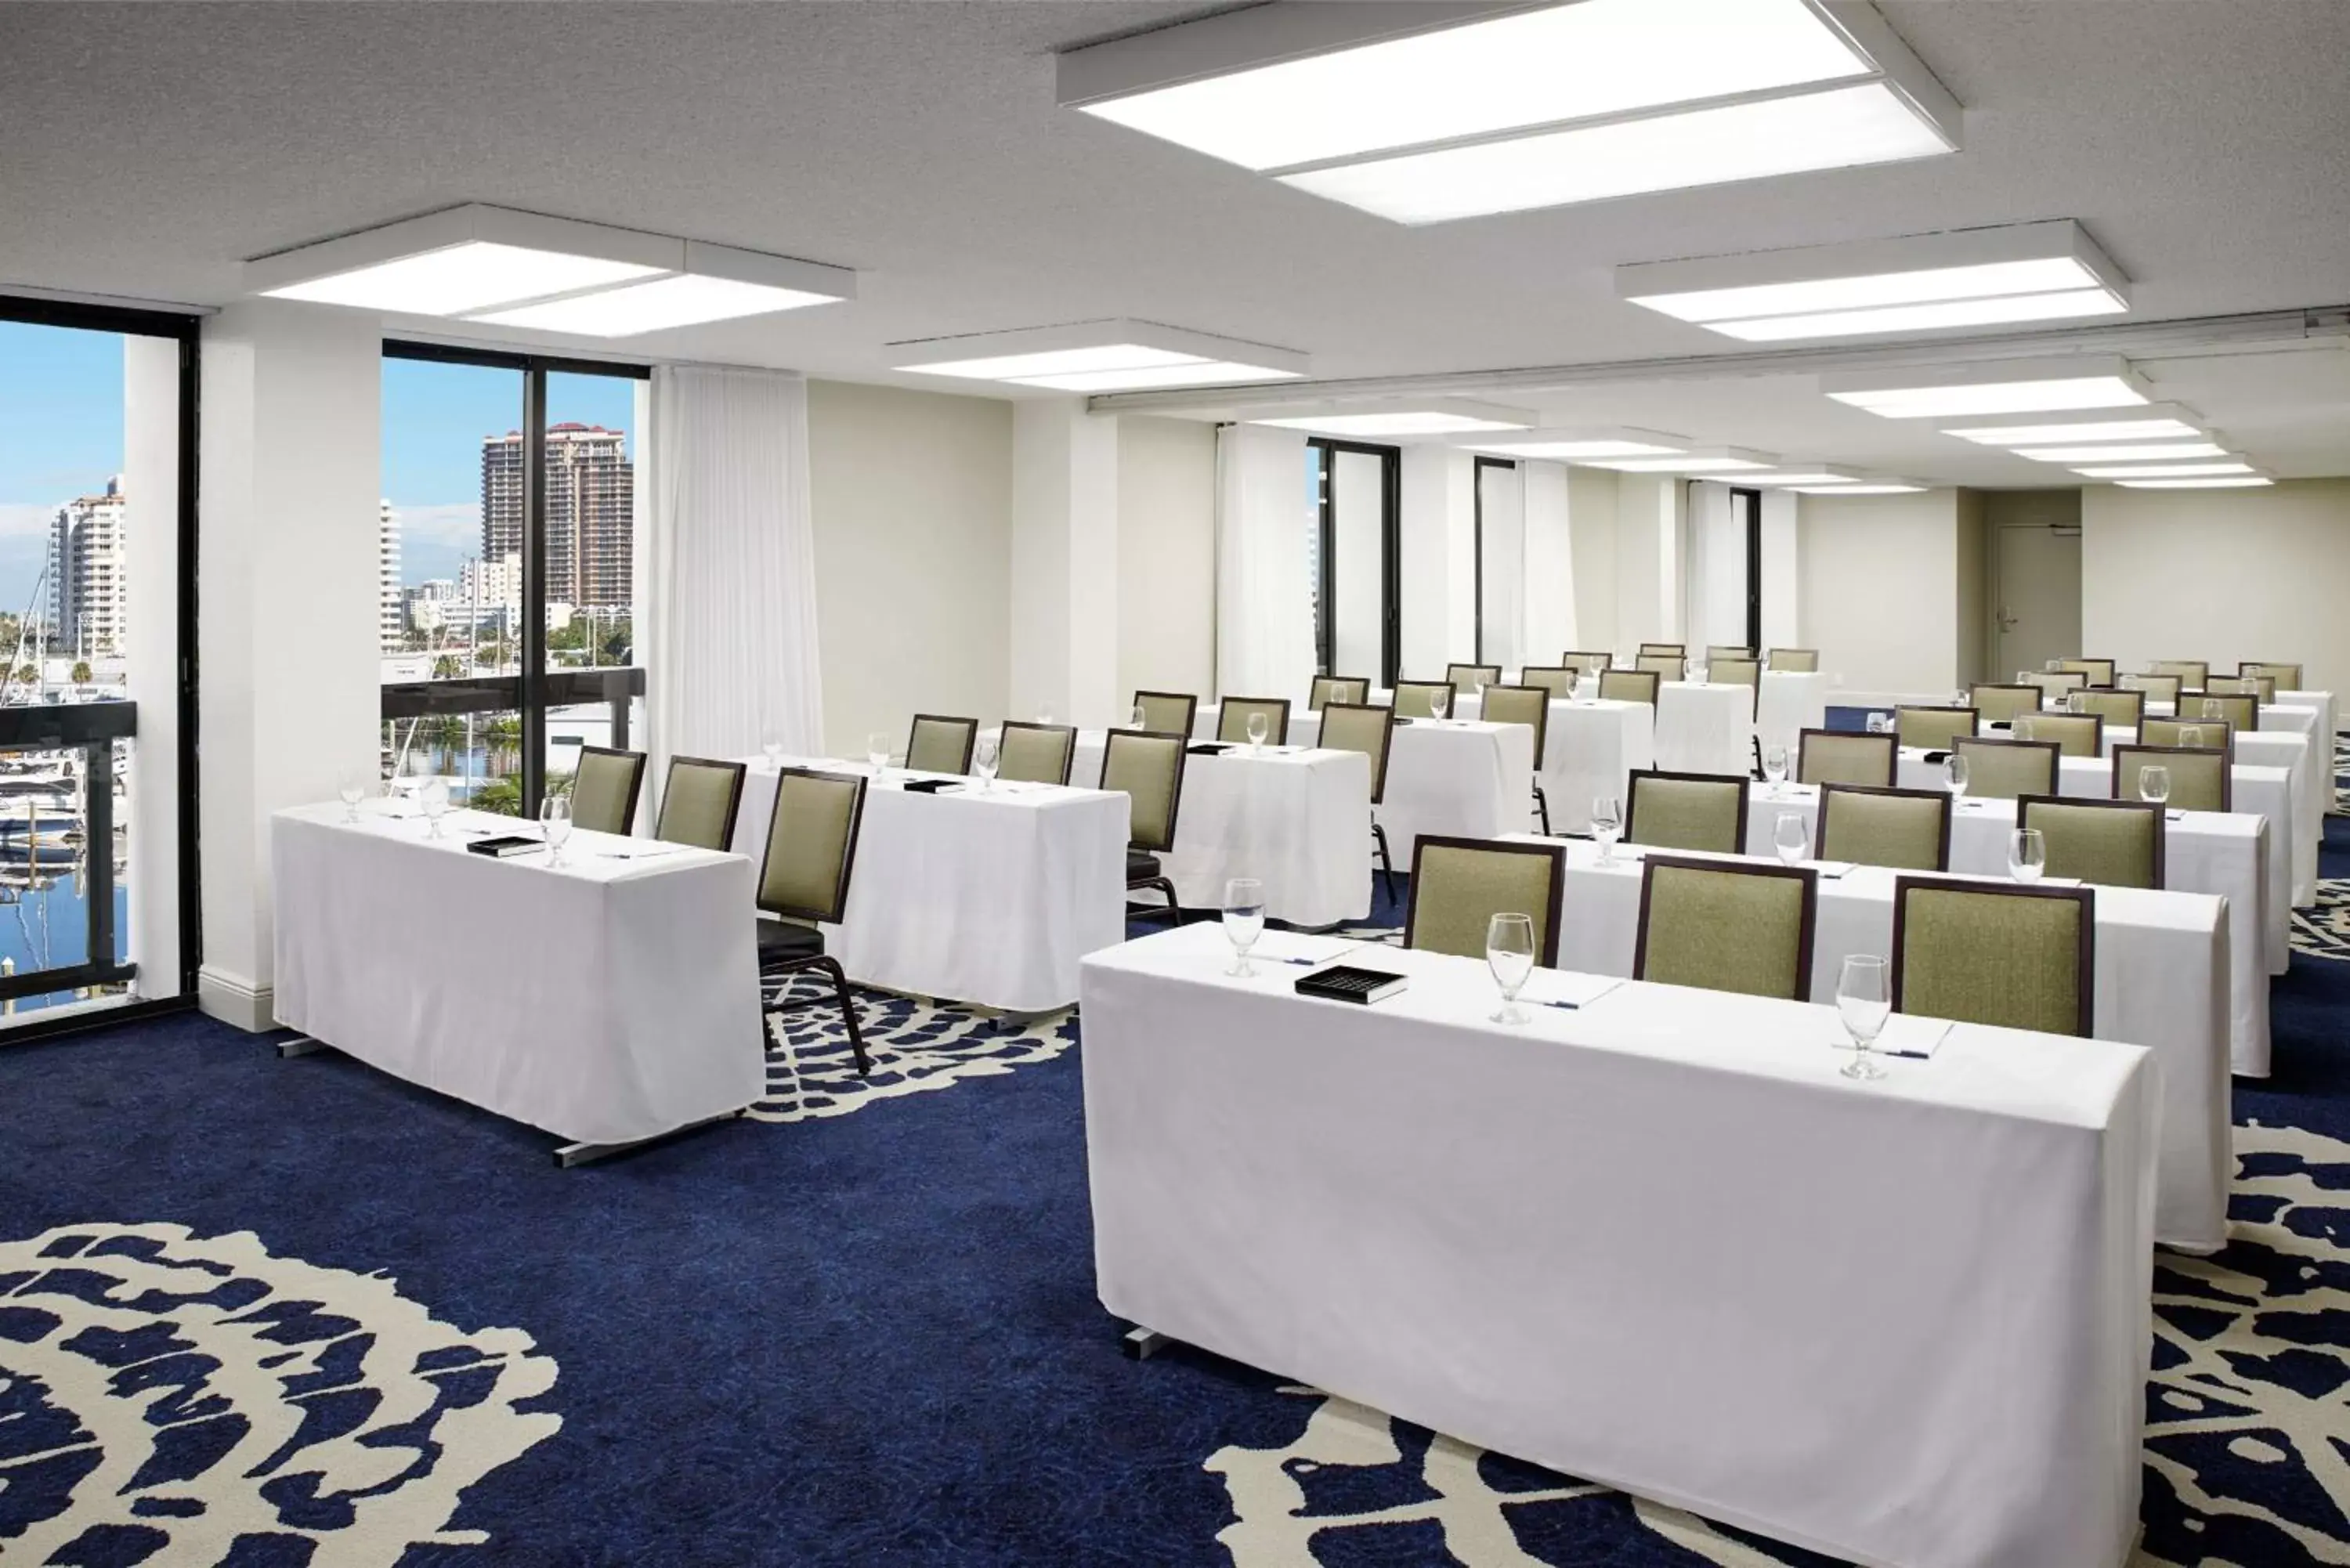 Meeting/conference room in Bahia Mar Fort Lauderdale Beach - DoubleTree by Hilton